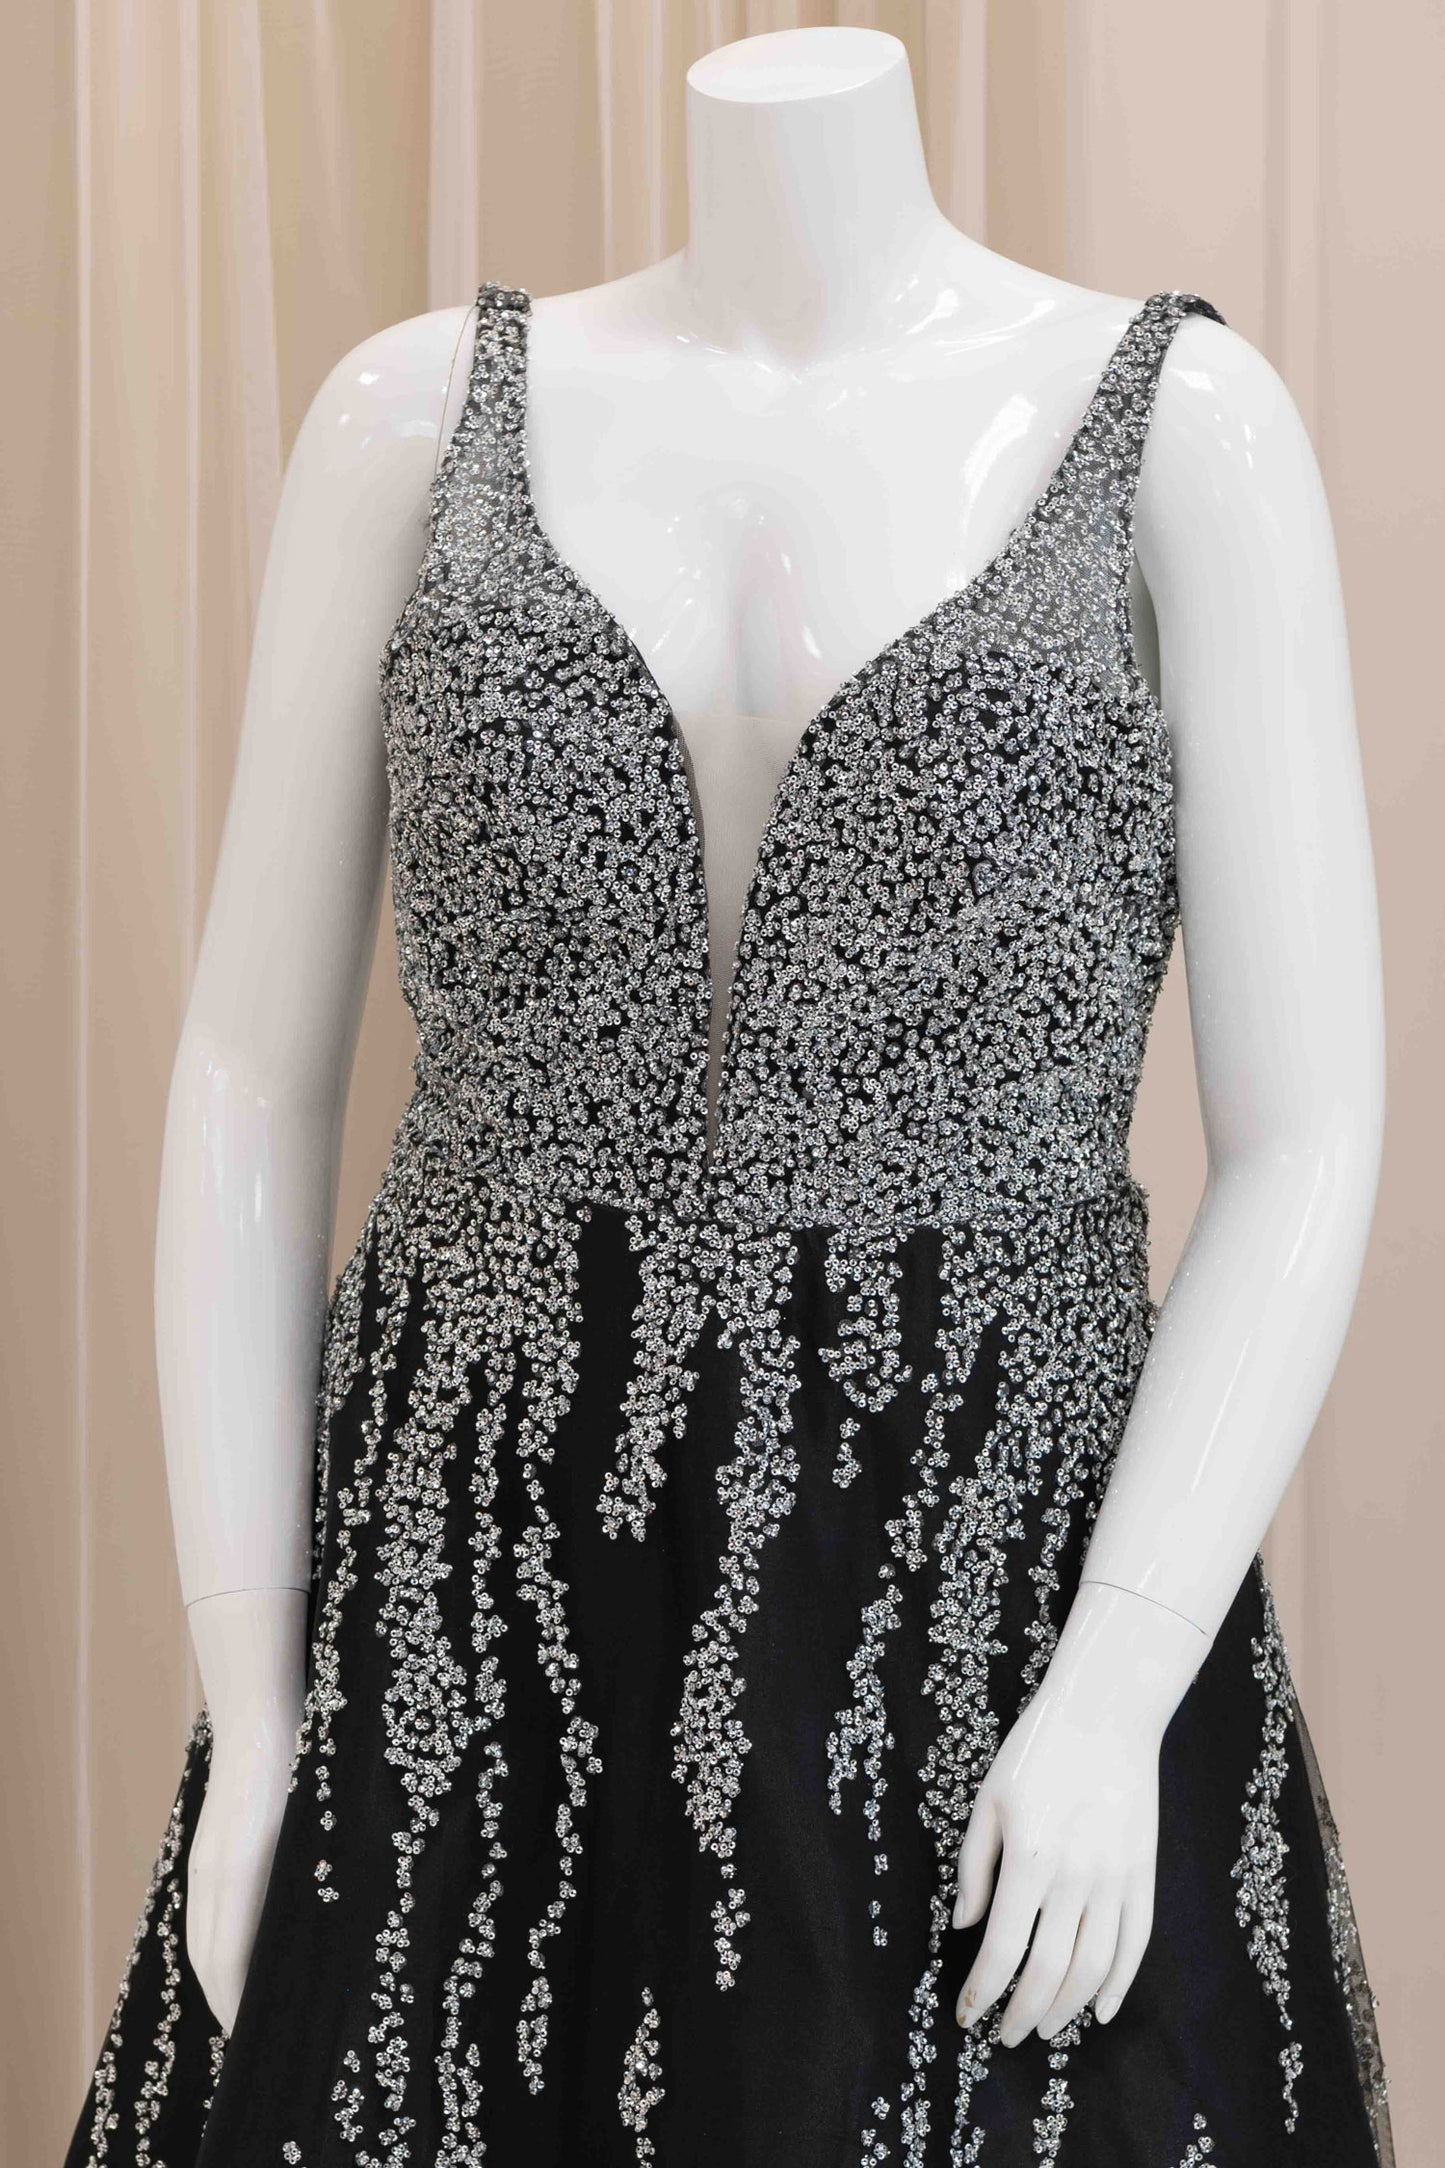 Melina Sequin Ball Gown in Black